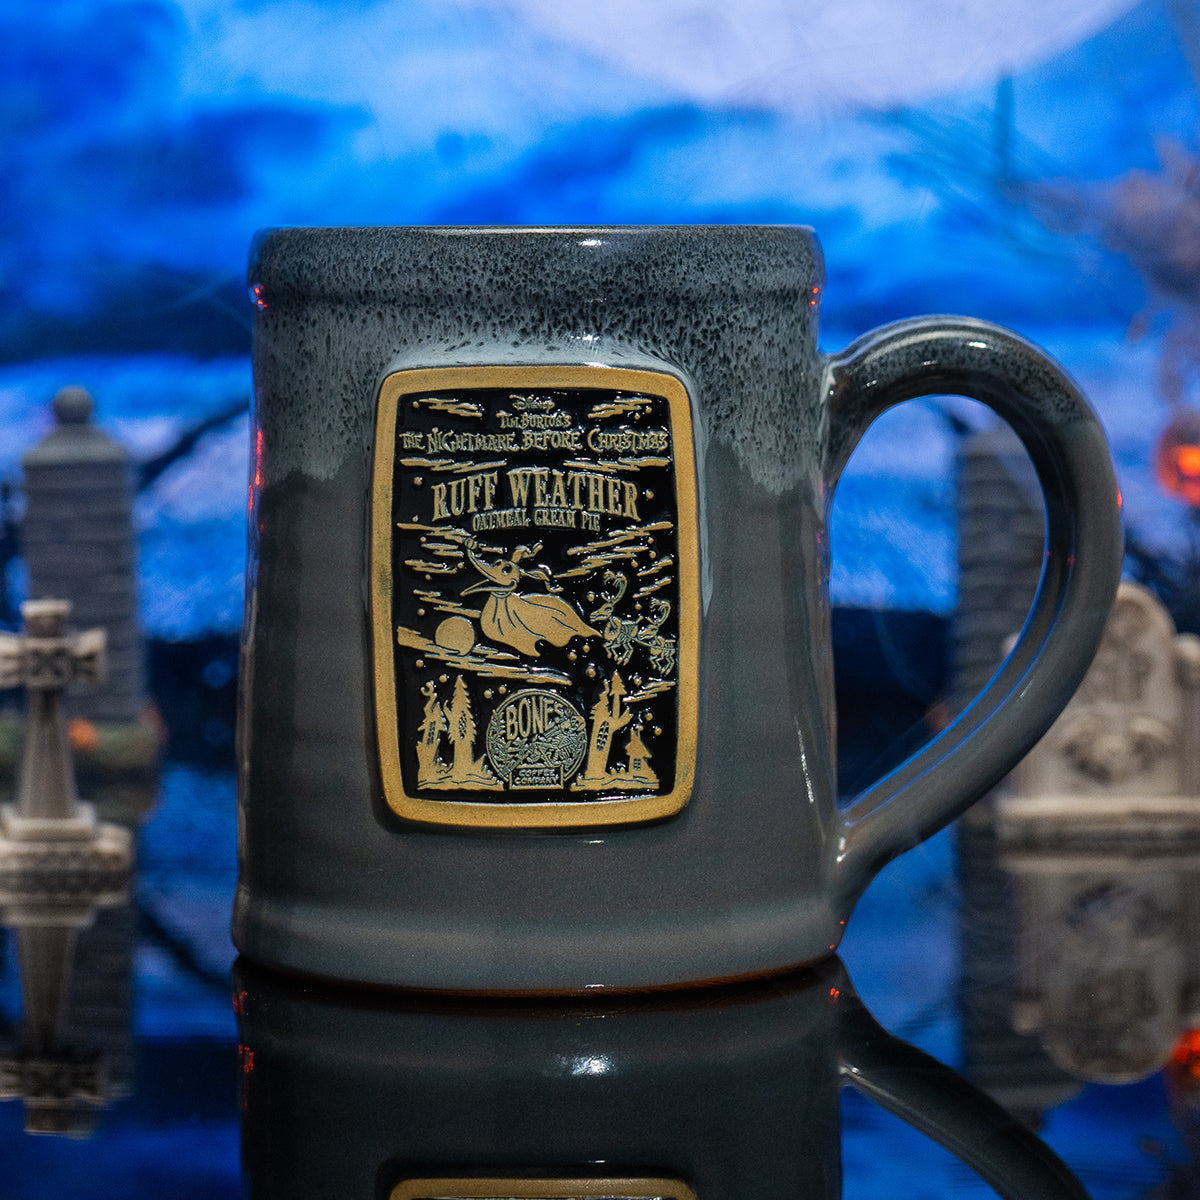 The front of the Bones Coffee Company Ruff Weather hand thrown mug with Zero the dog on the golden medallion. It is inspired by Disney Tim Burton’s The Nightmare Before Christmas. The mug is grey colored with a black and white glaze on top. It is inside a toy graveyard.